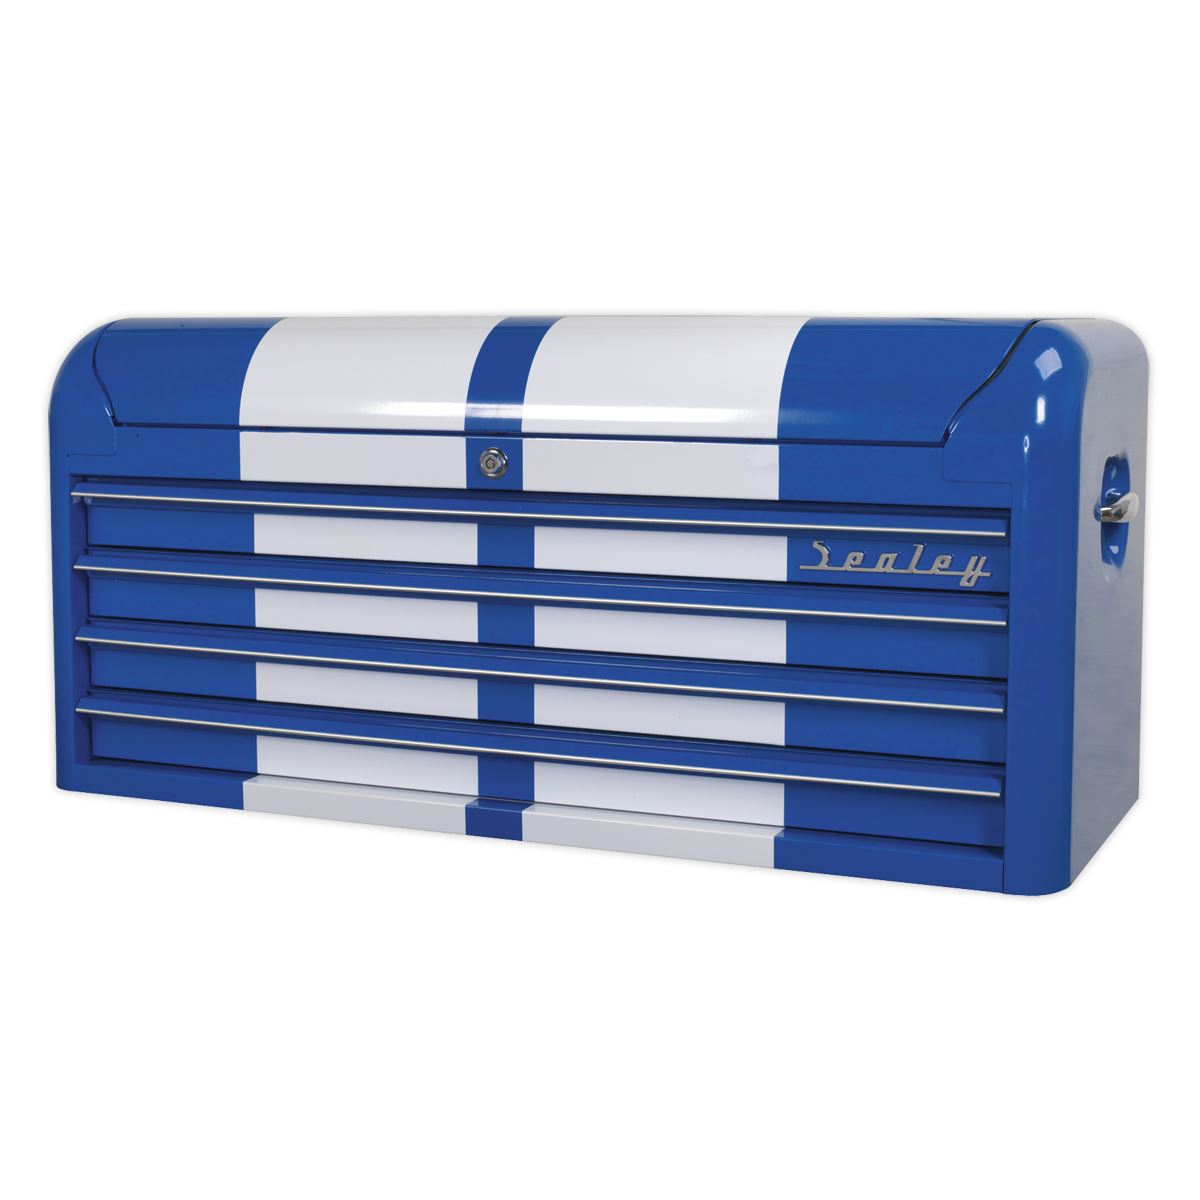 Sealey Premier Topchest 4 Drawer Wide Retro Style - Blue with White Stripes